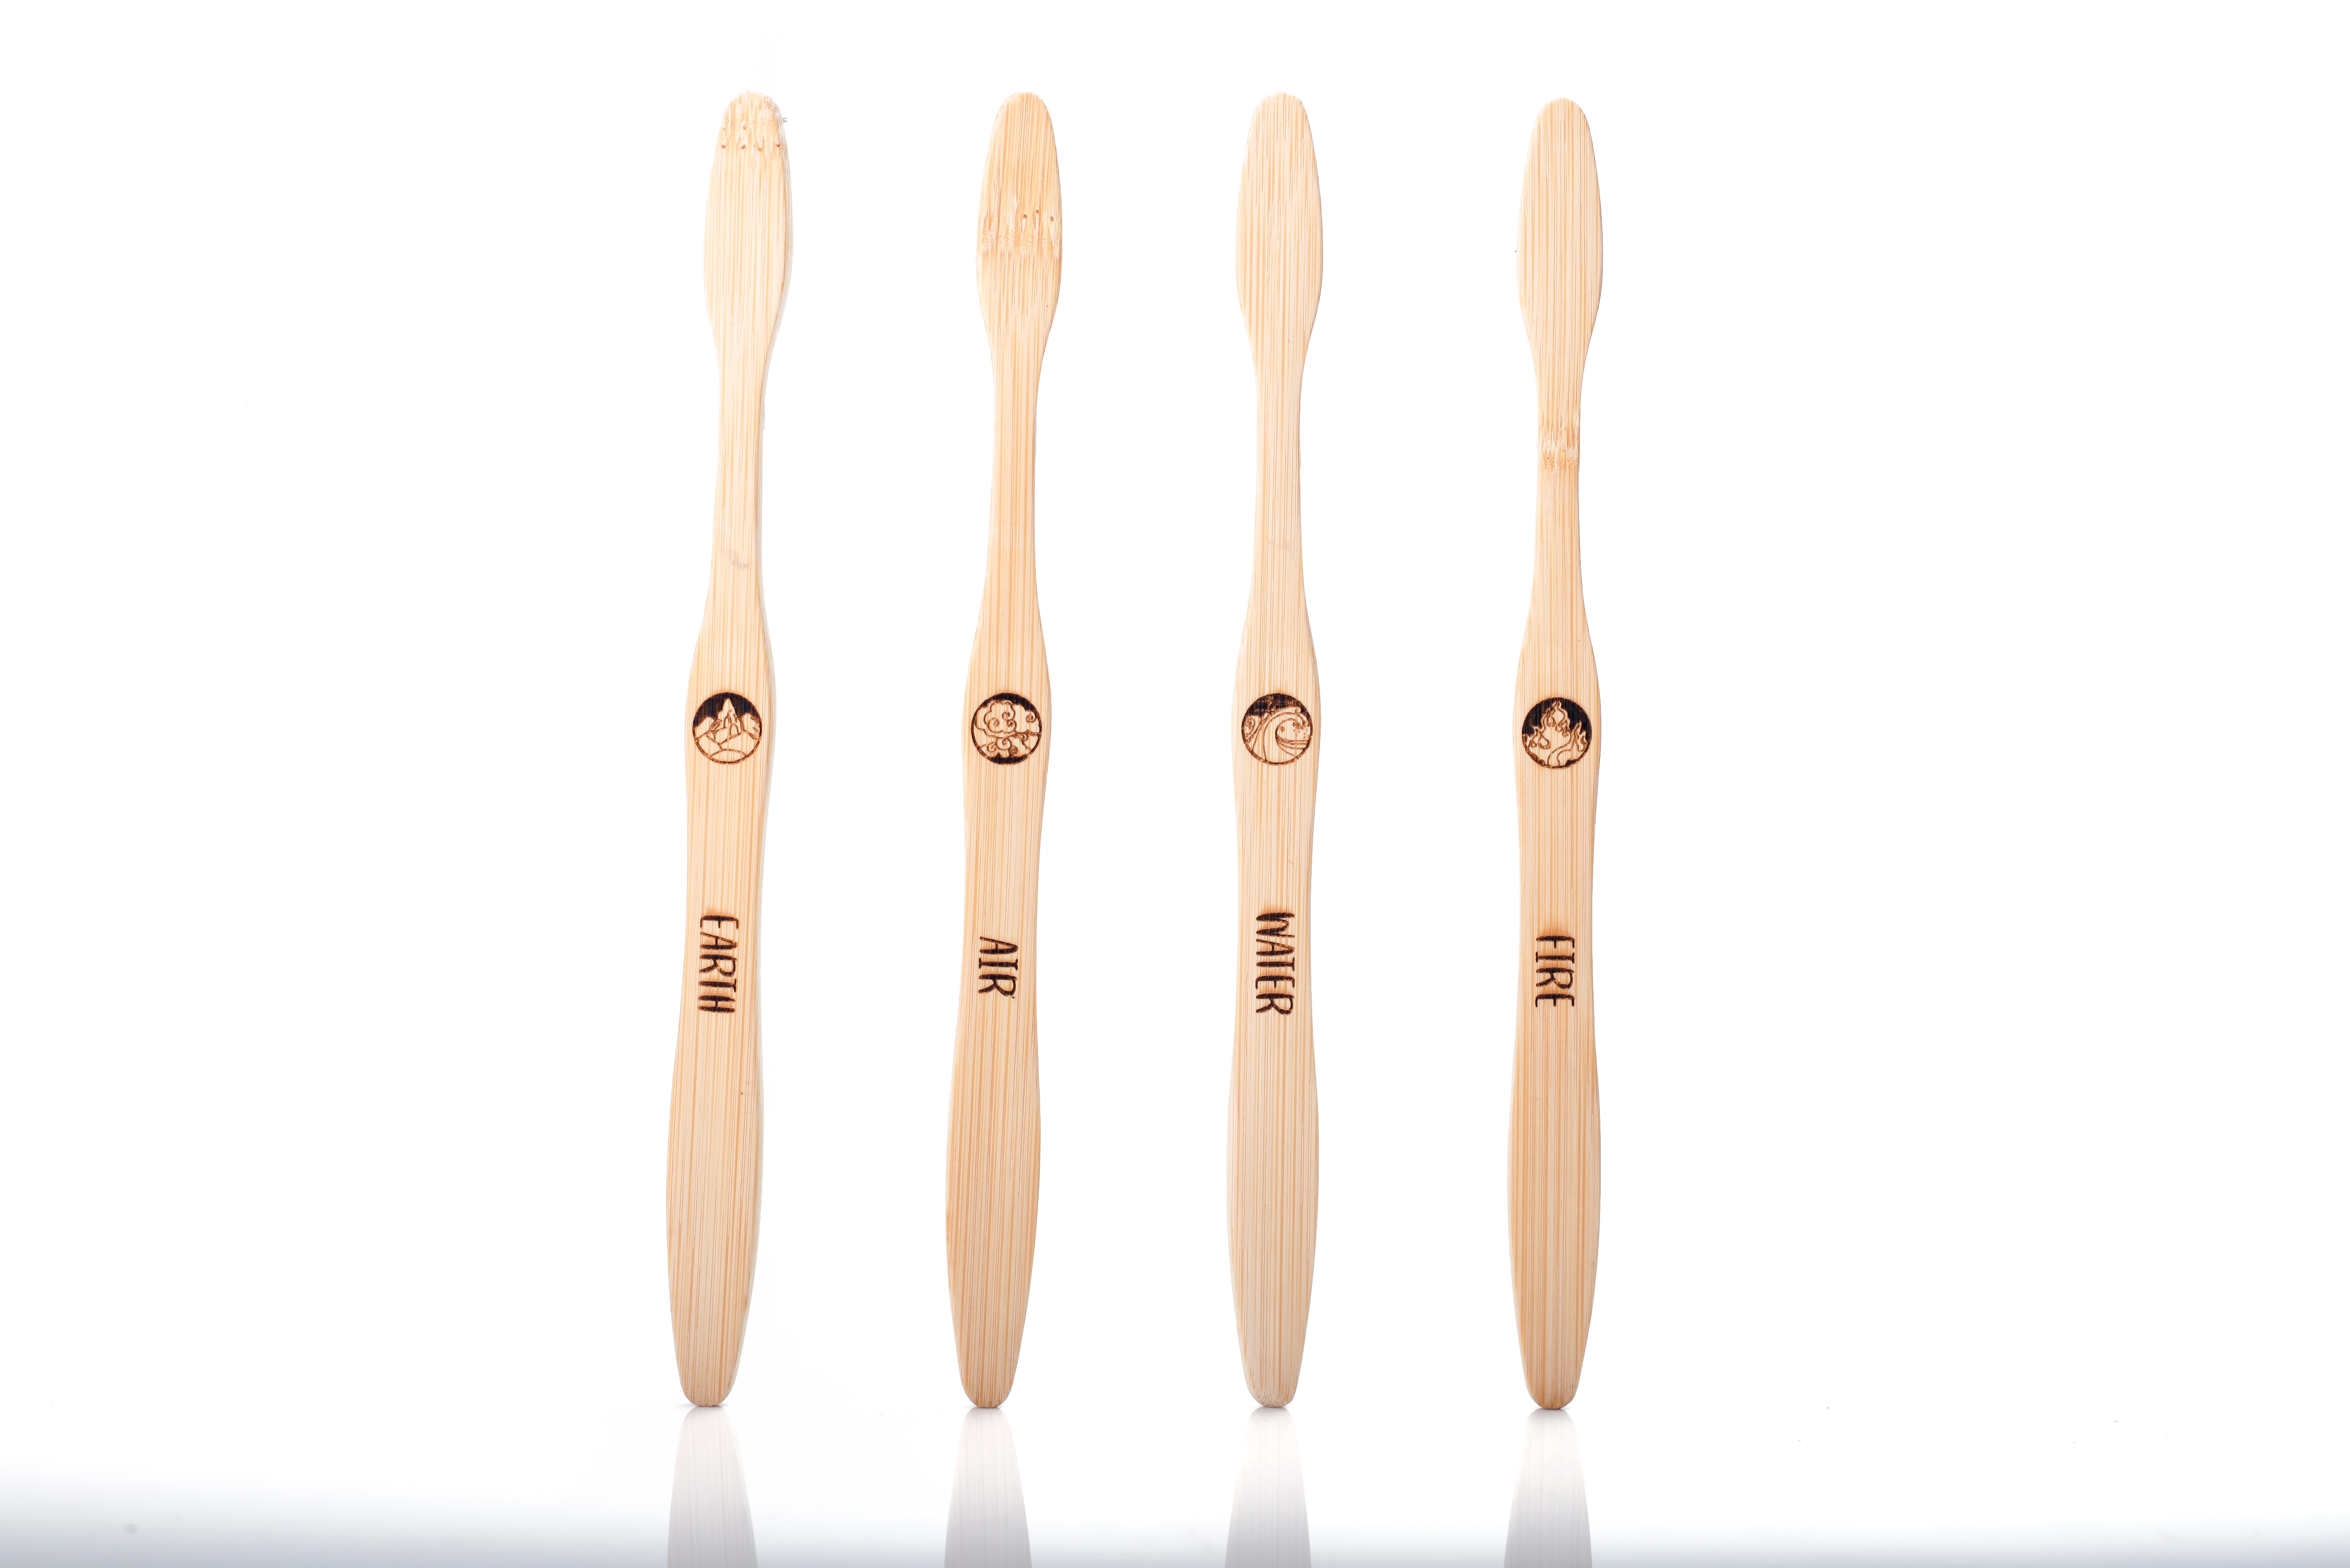 NUP Living - 4 elements edition - Bamboo toothbrush